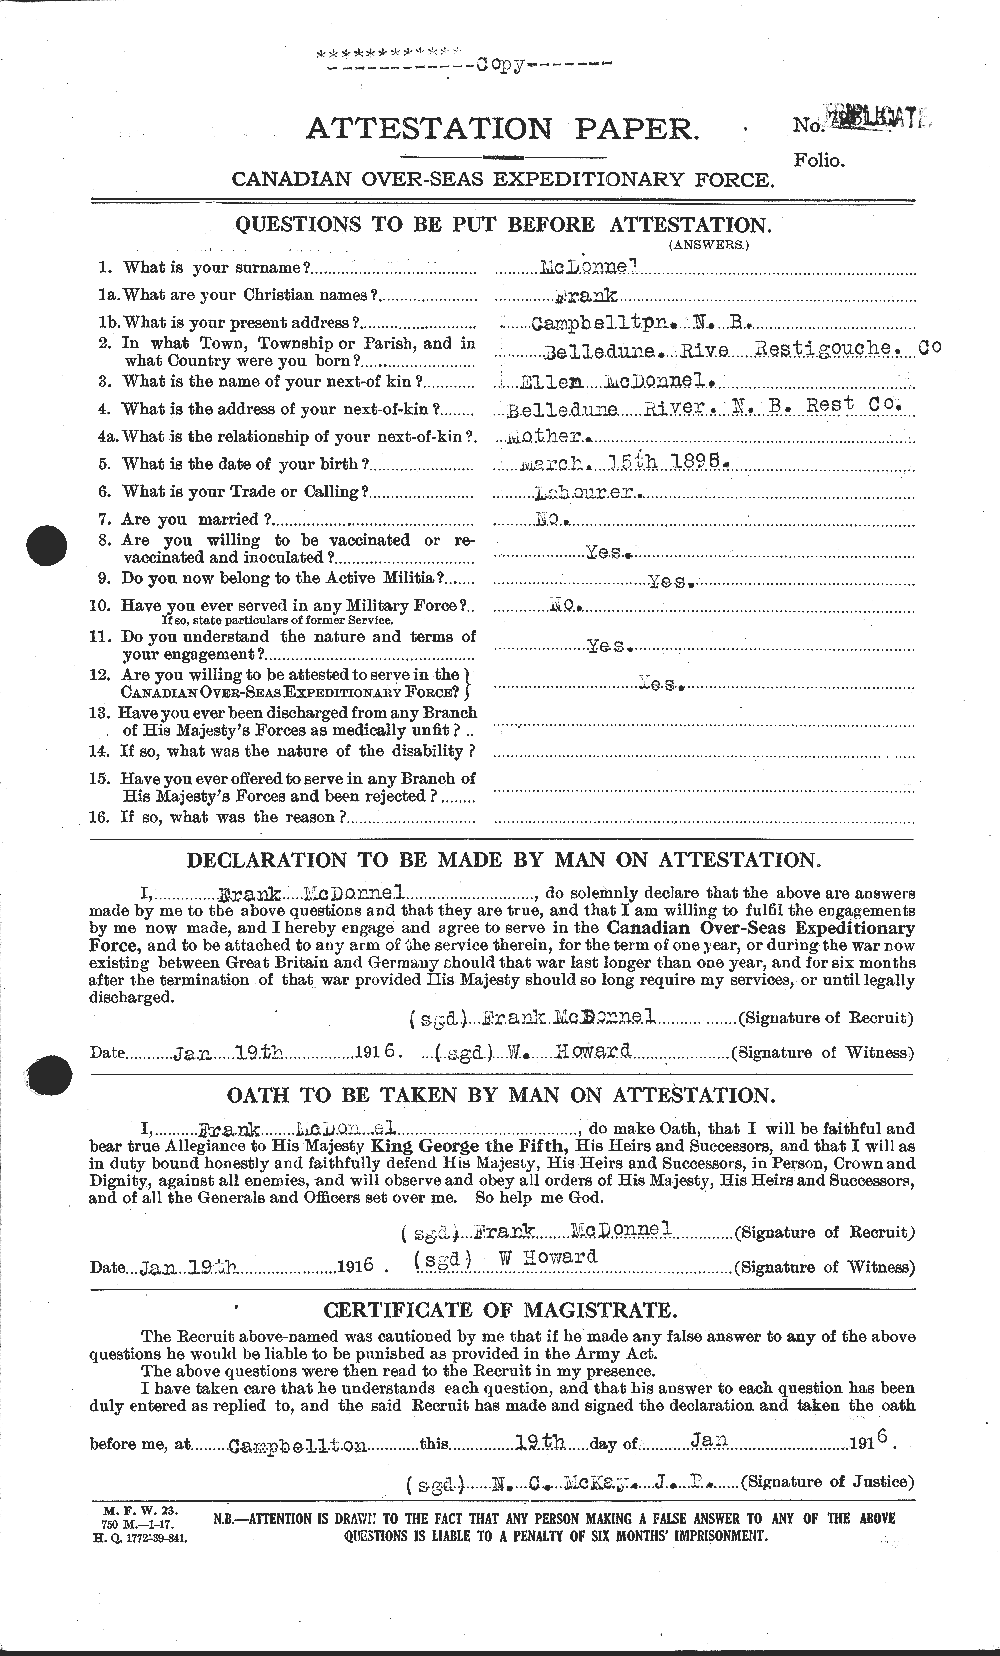 Personnel Records of the First World War - CEF 521509a